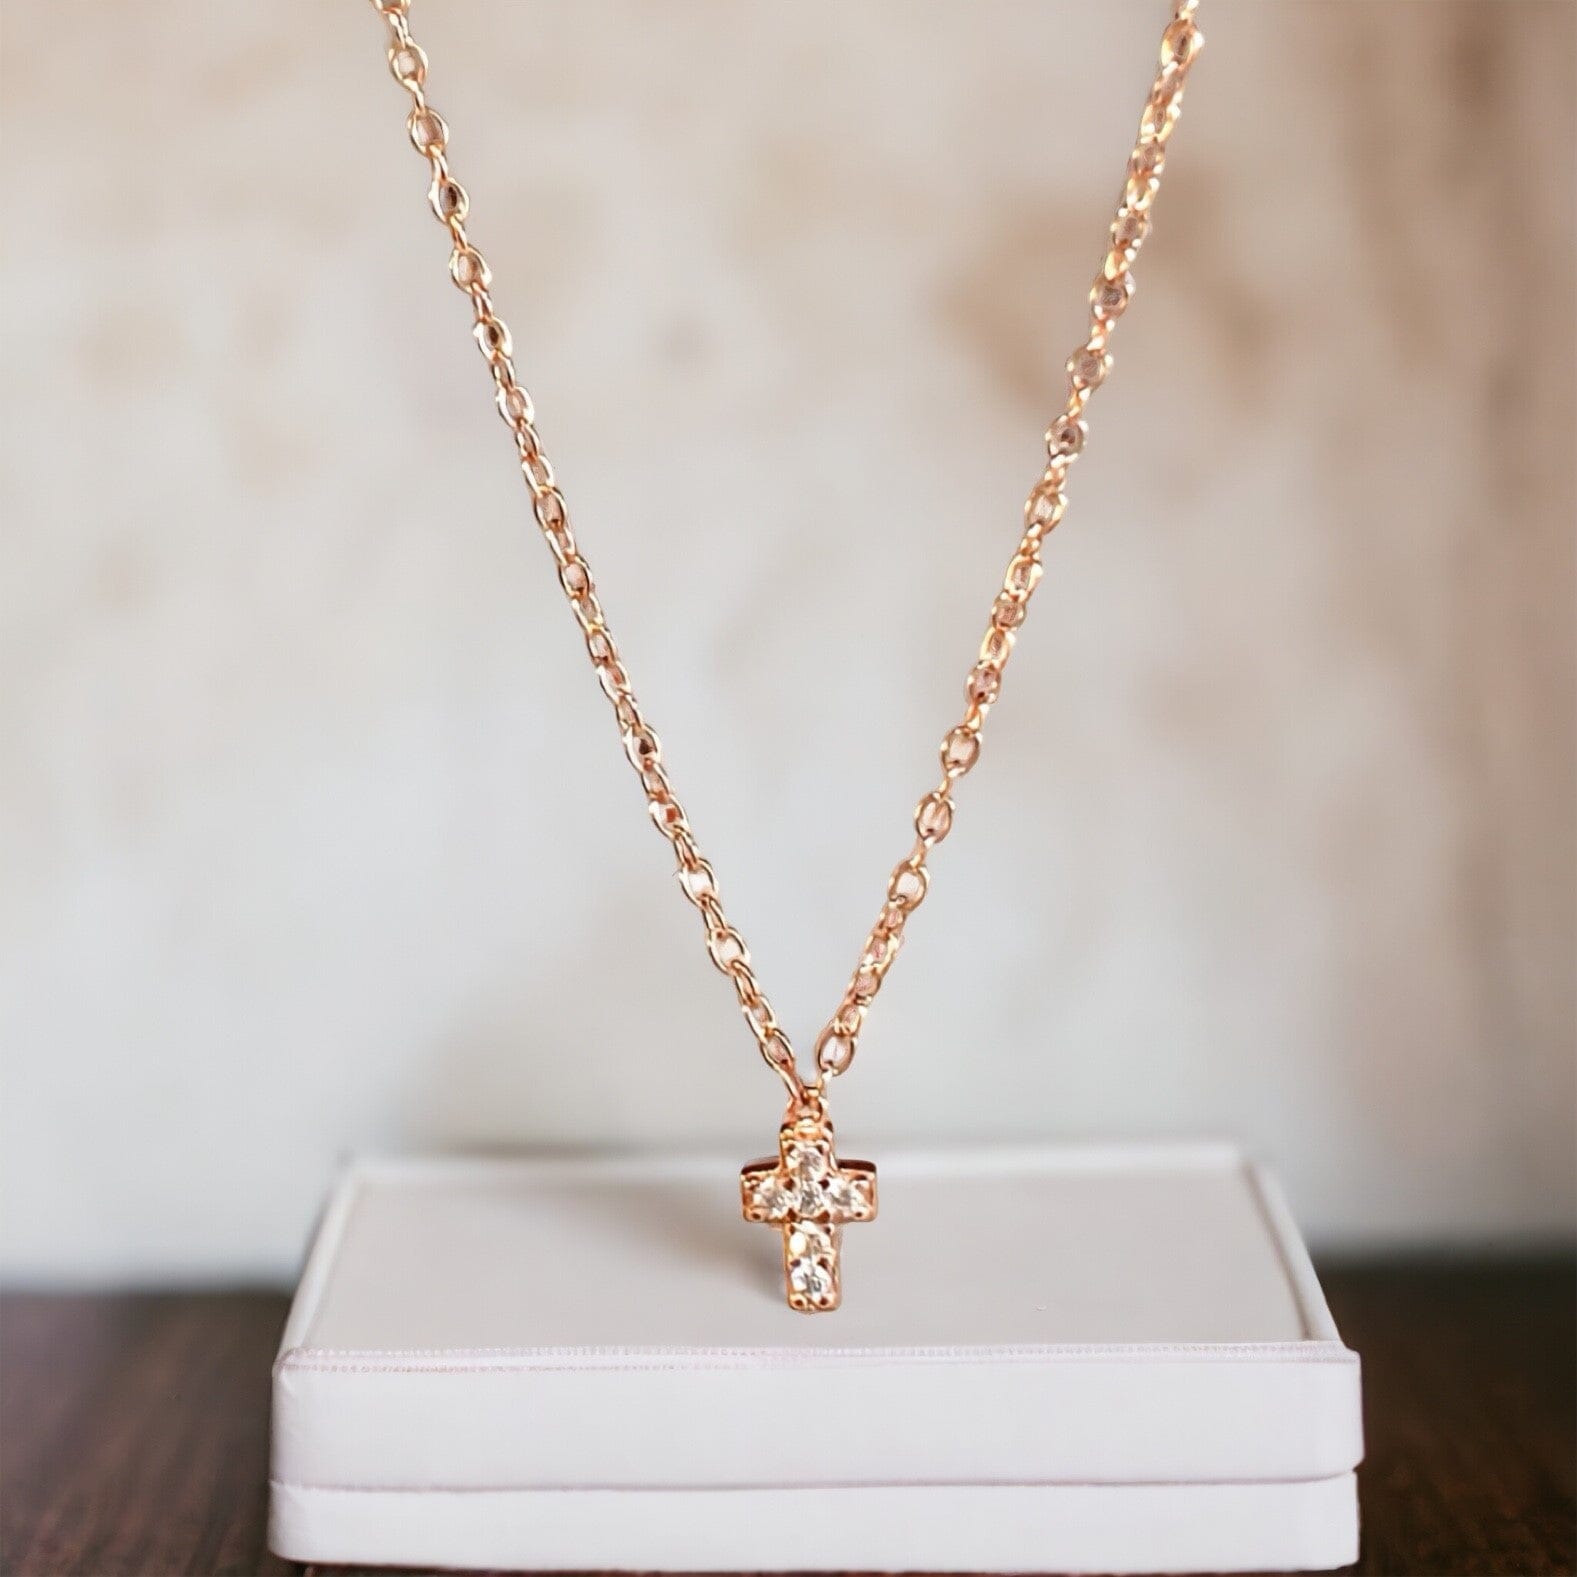 Clover cross necklace in turquise in rose gold – Opa Designs